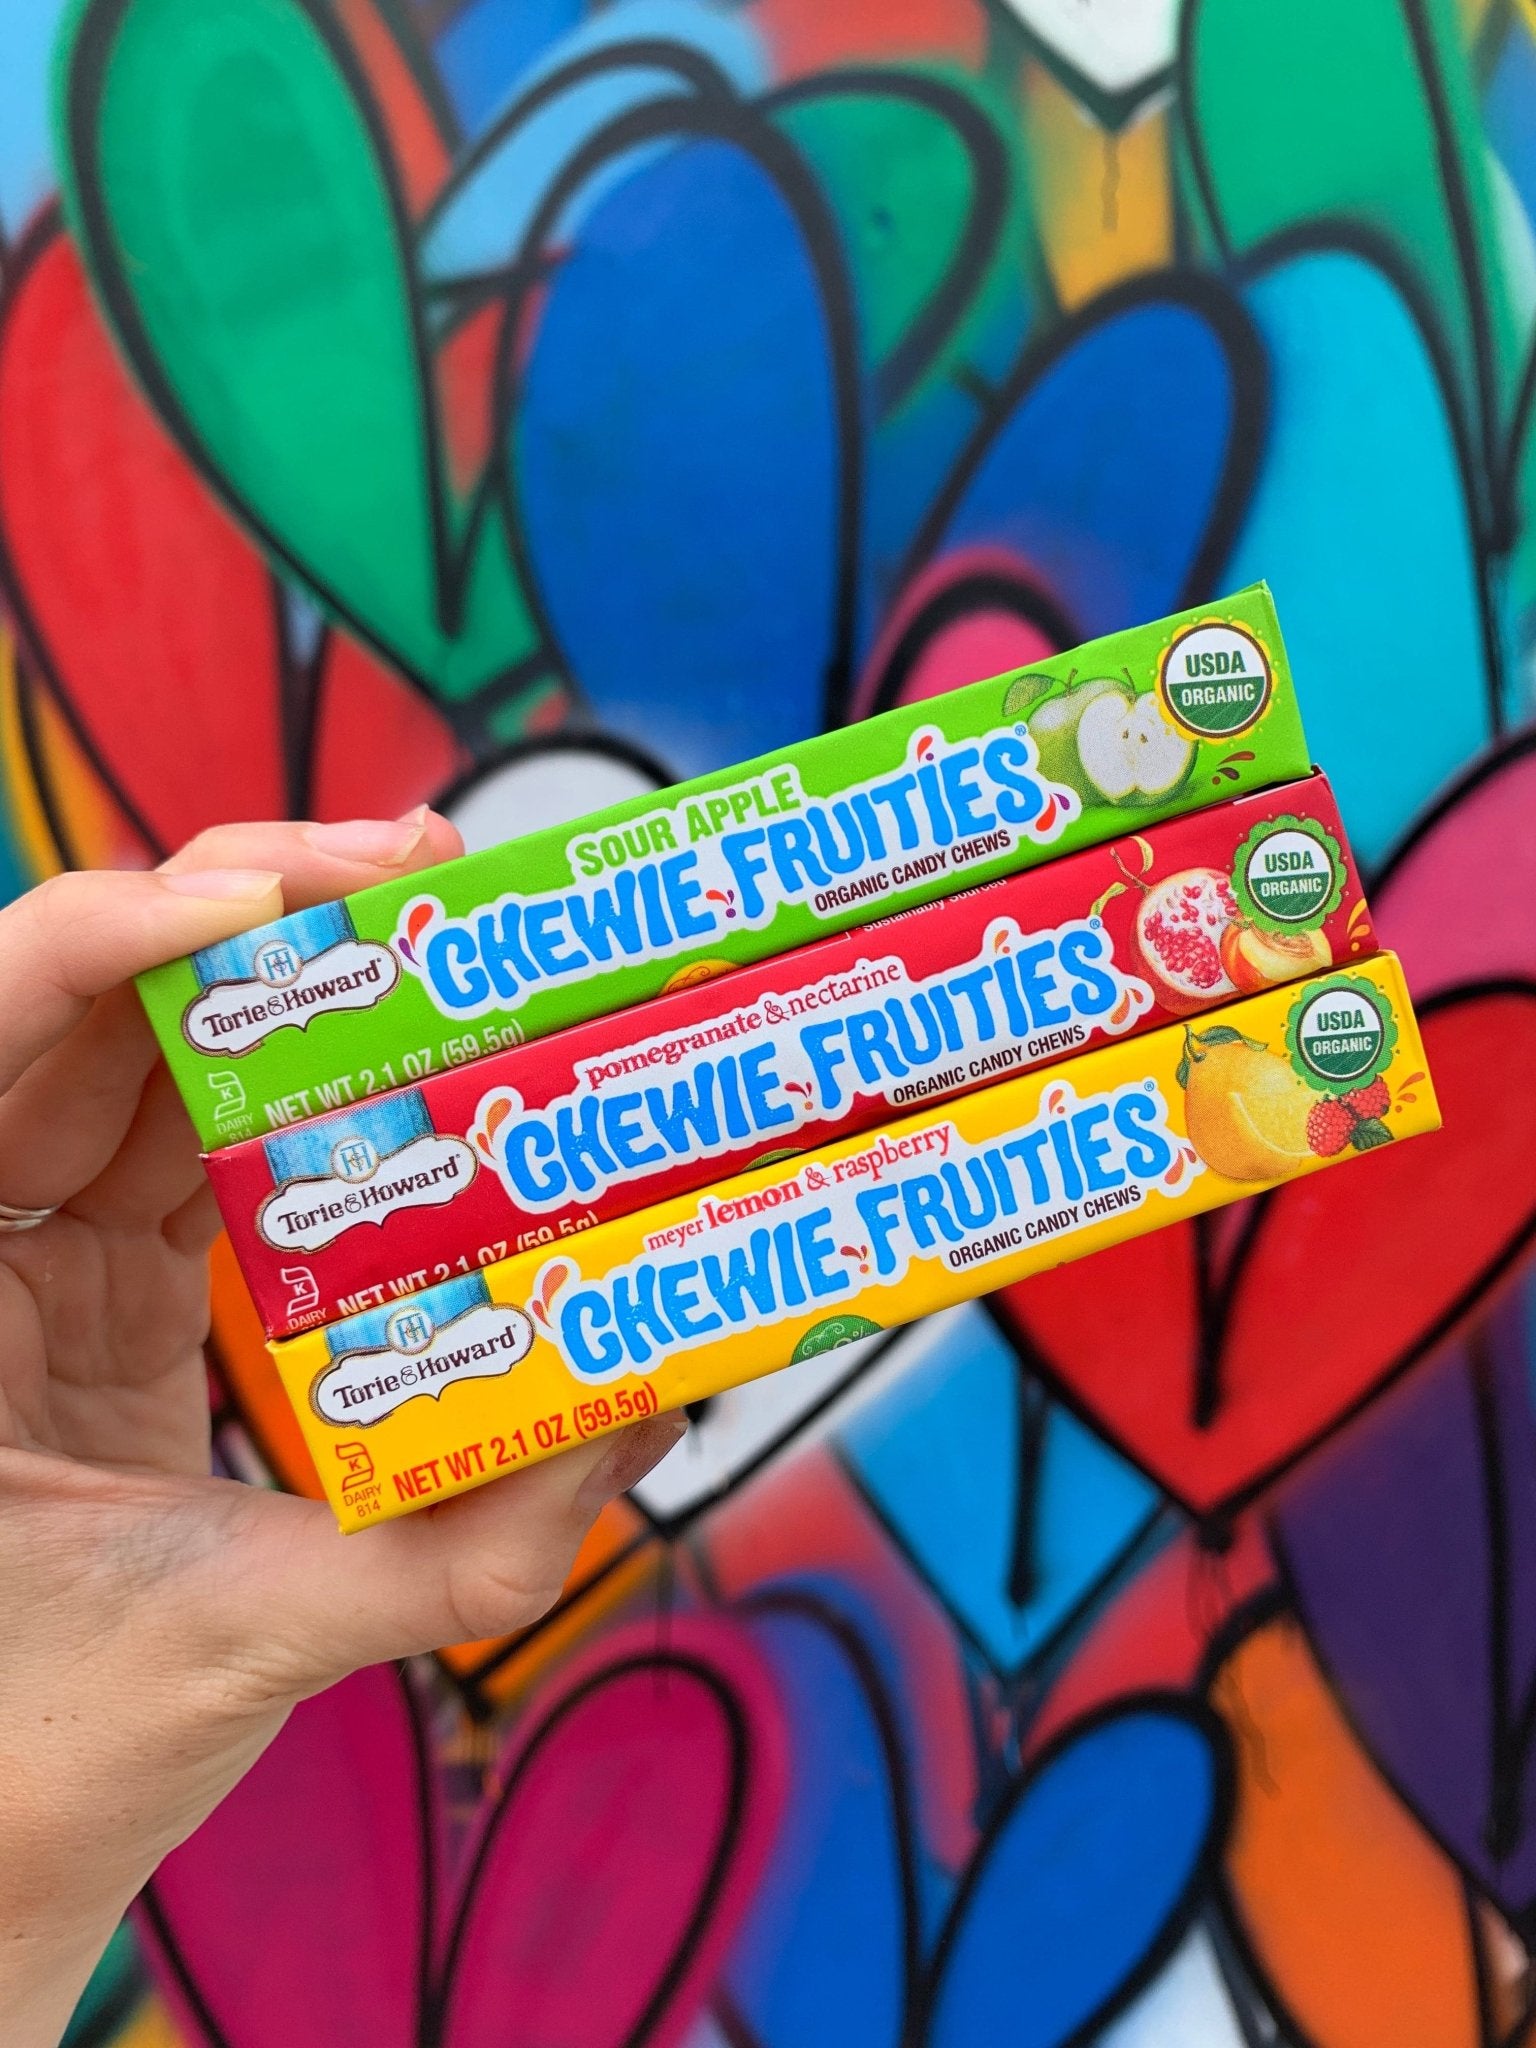 Torie & Howard Chewie Fruities Sour Apple, Pomegranate & Nectarine, and Meyer Lemon & Raspberry Stick Packs with heart graffiti background